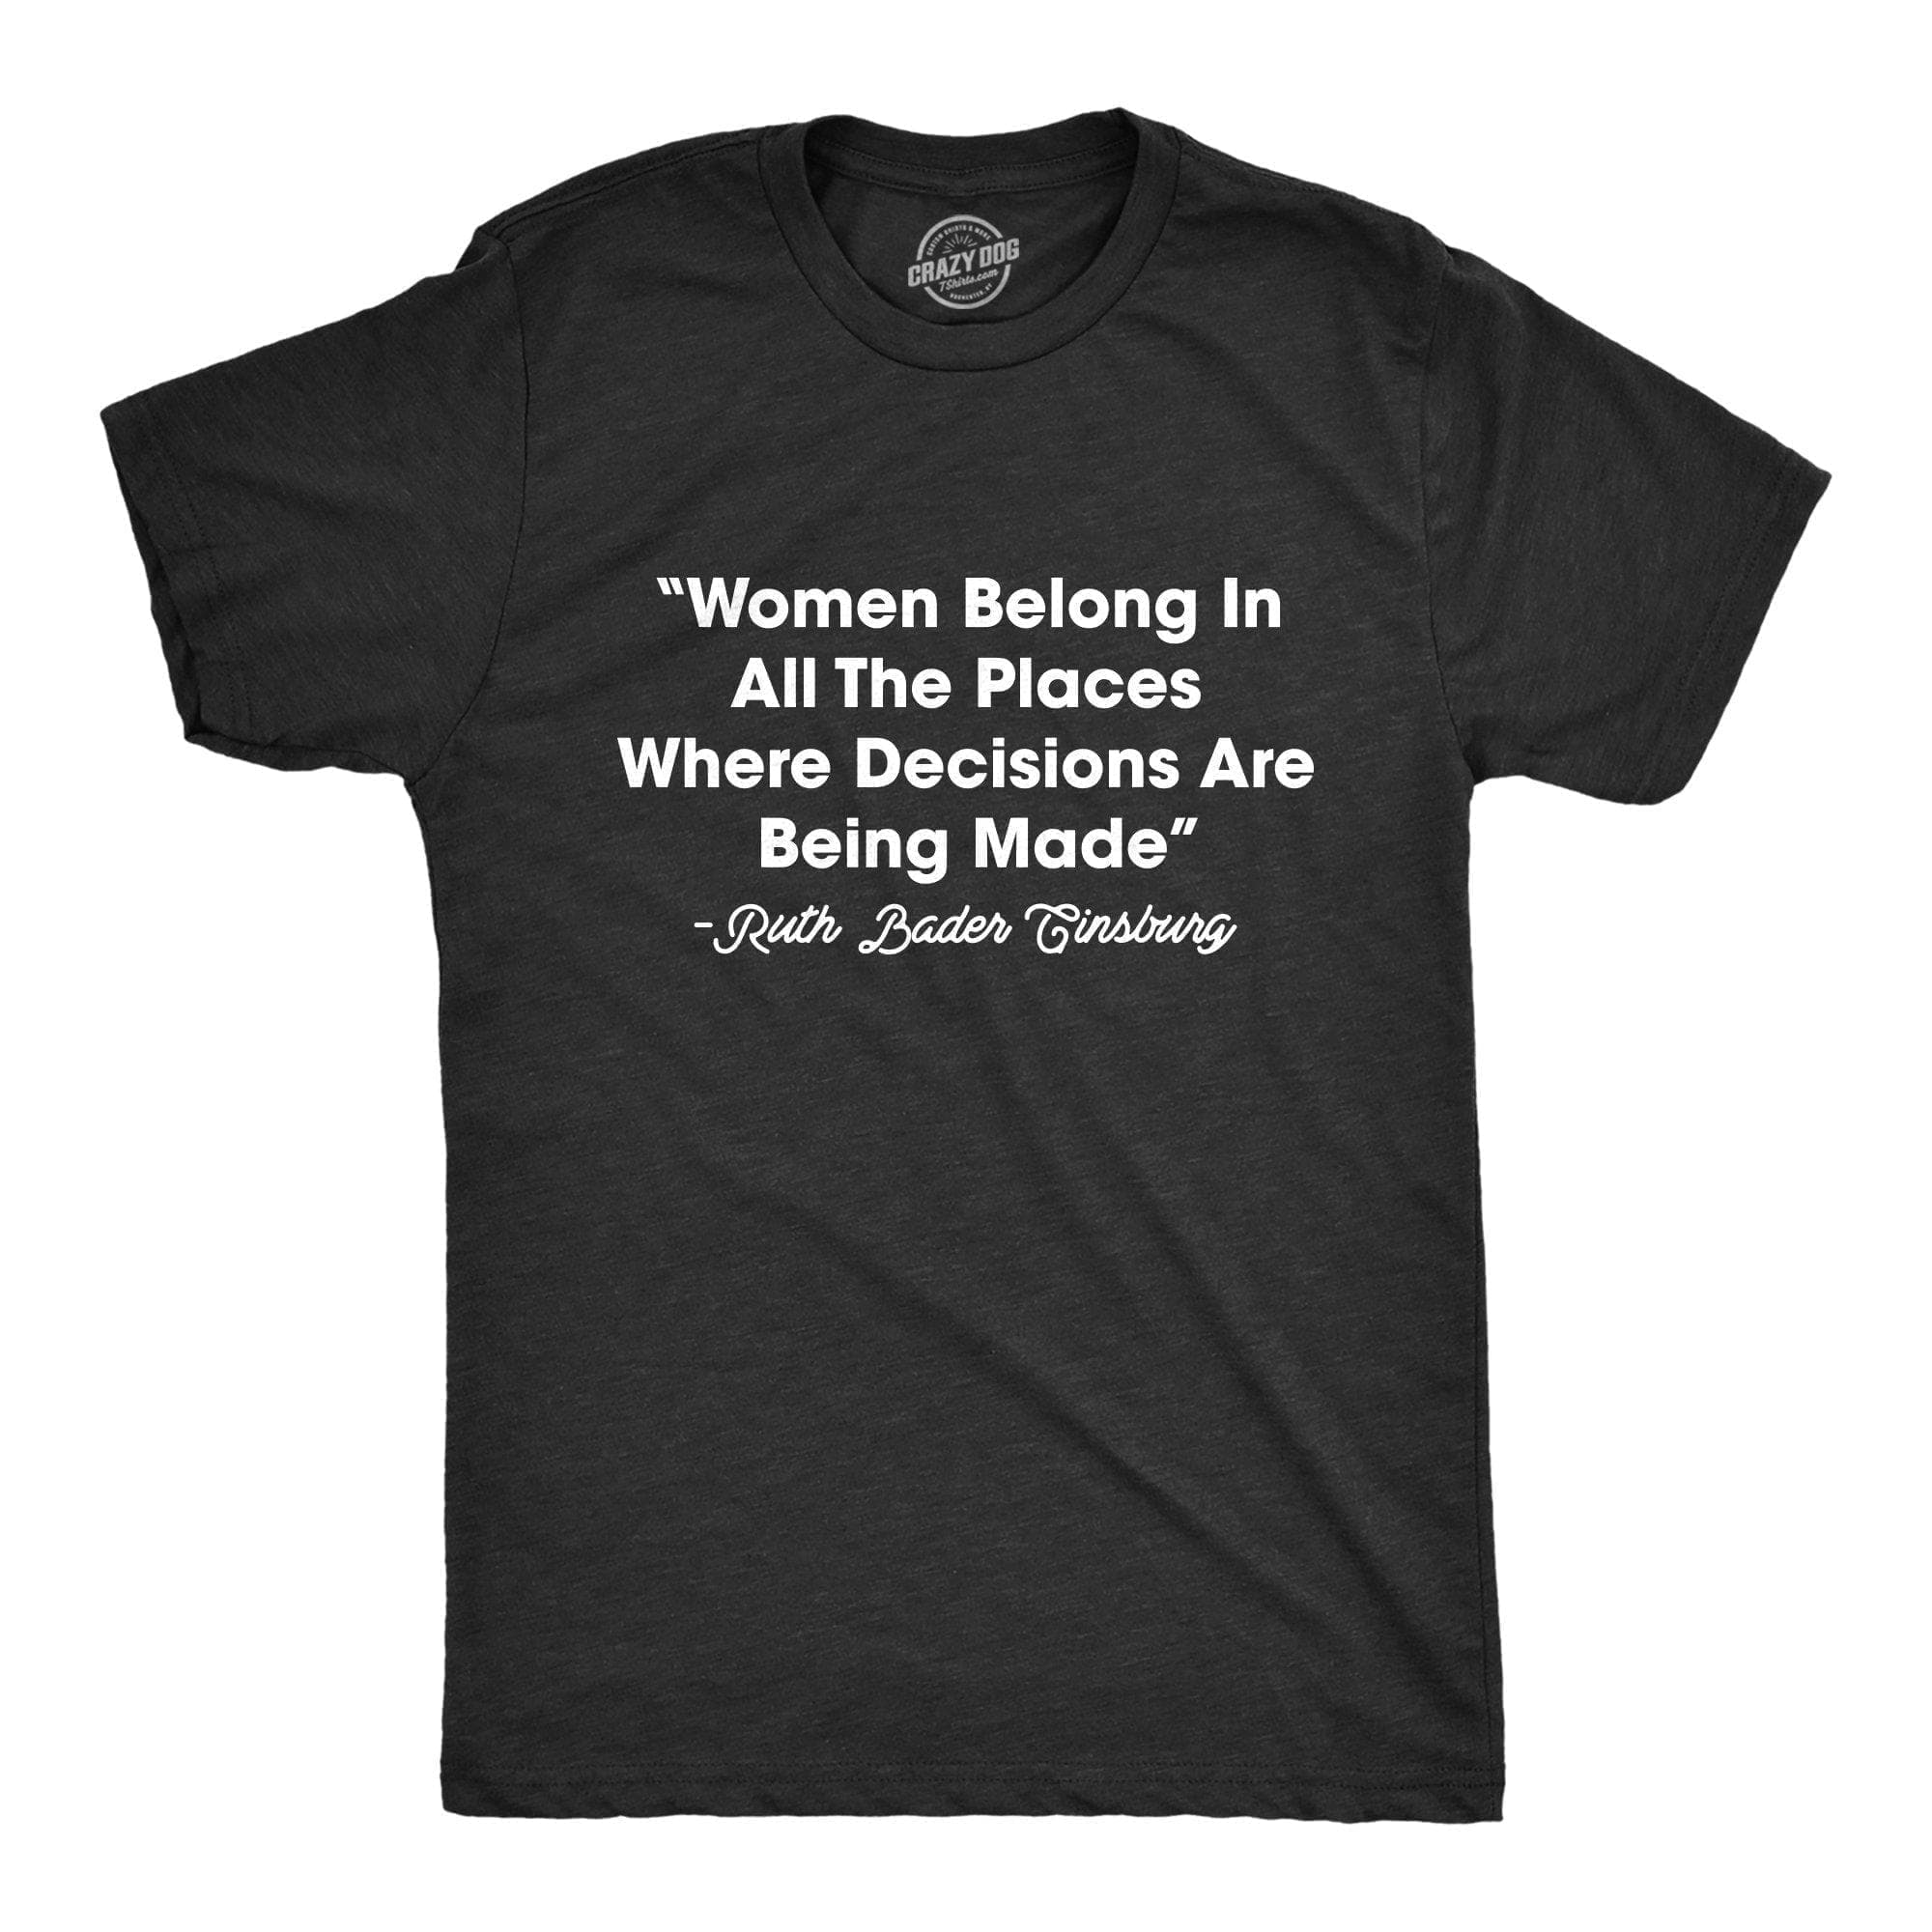 Women Belong In All The Places Where Decisions Are Made Men's Tshirt - Crazy Dog T-Shirts